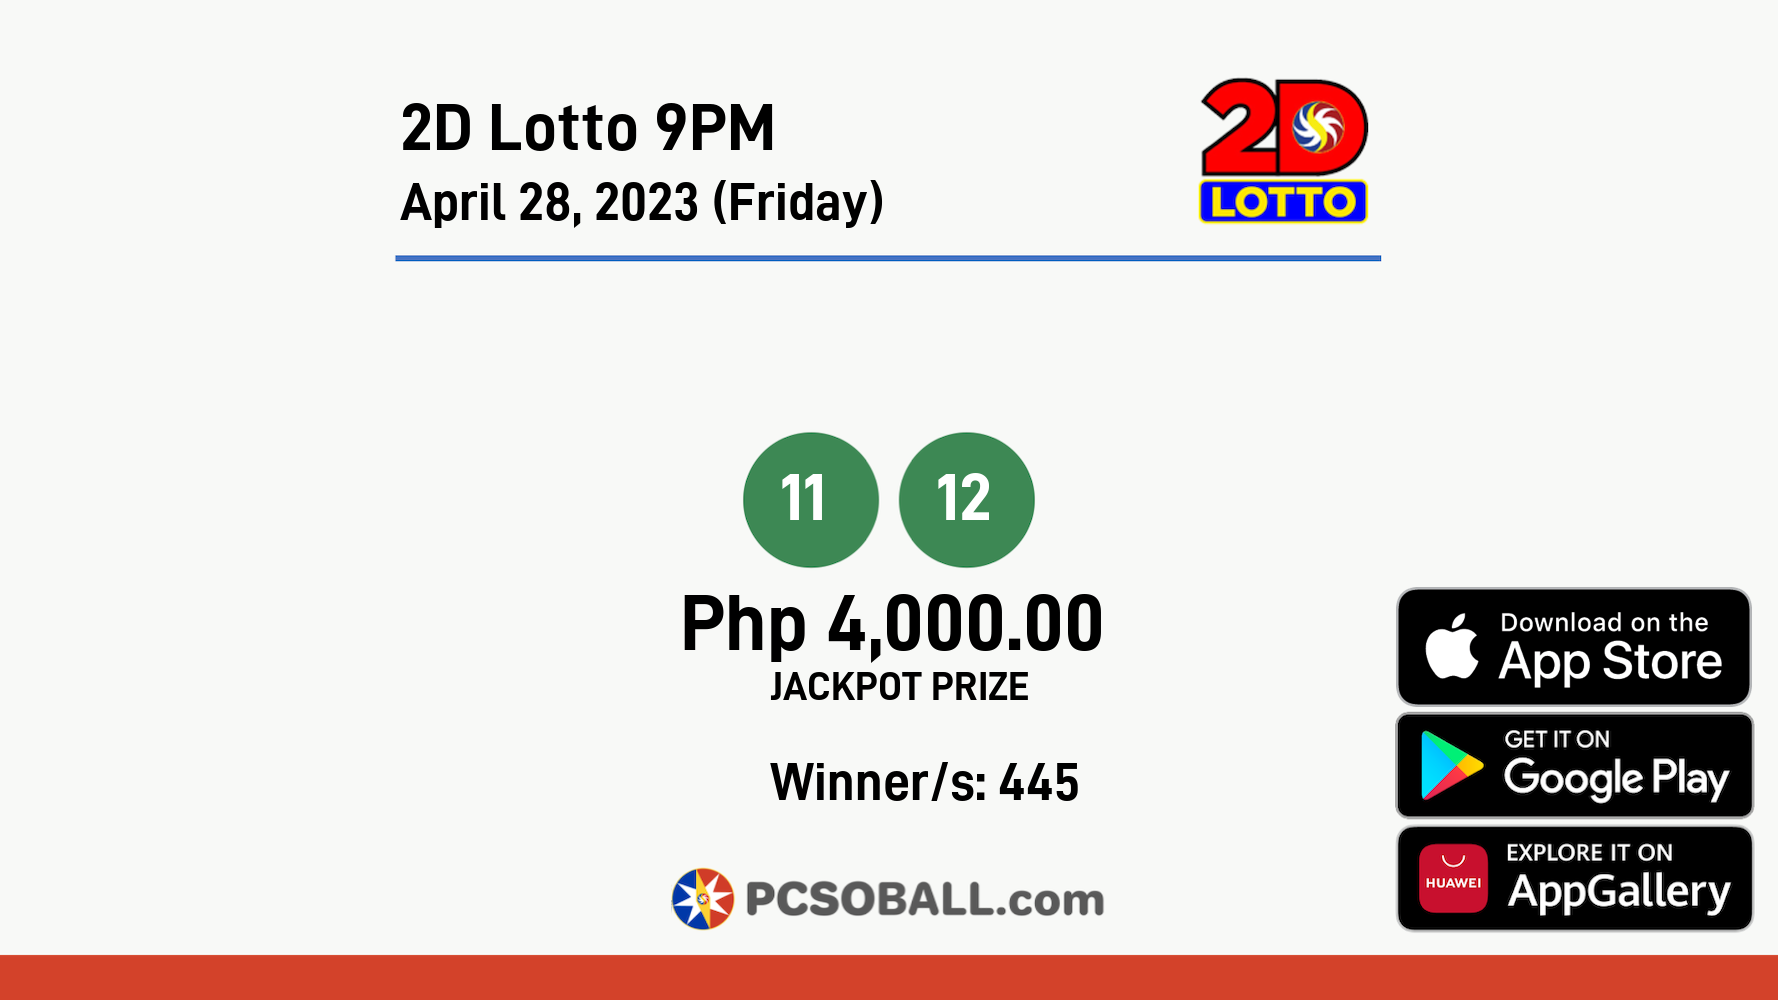 2D Lotto 9PM April 28, 2023 (Friday) Result